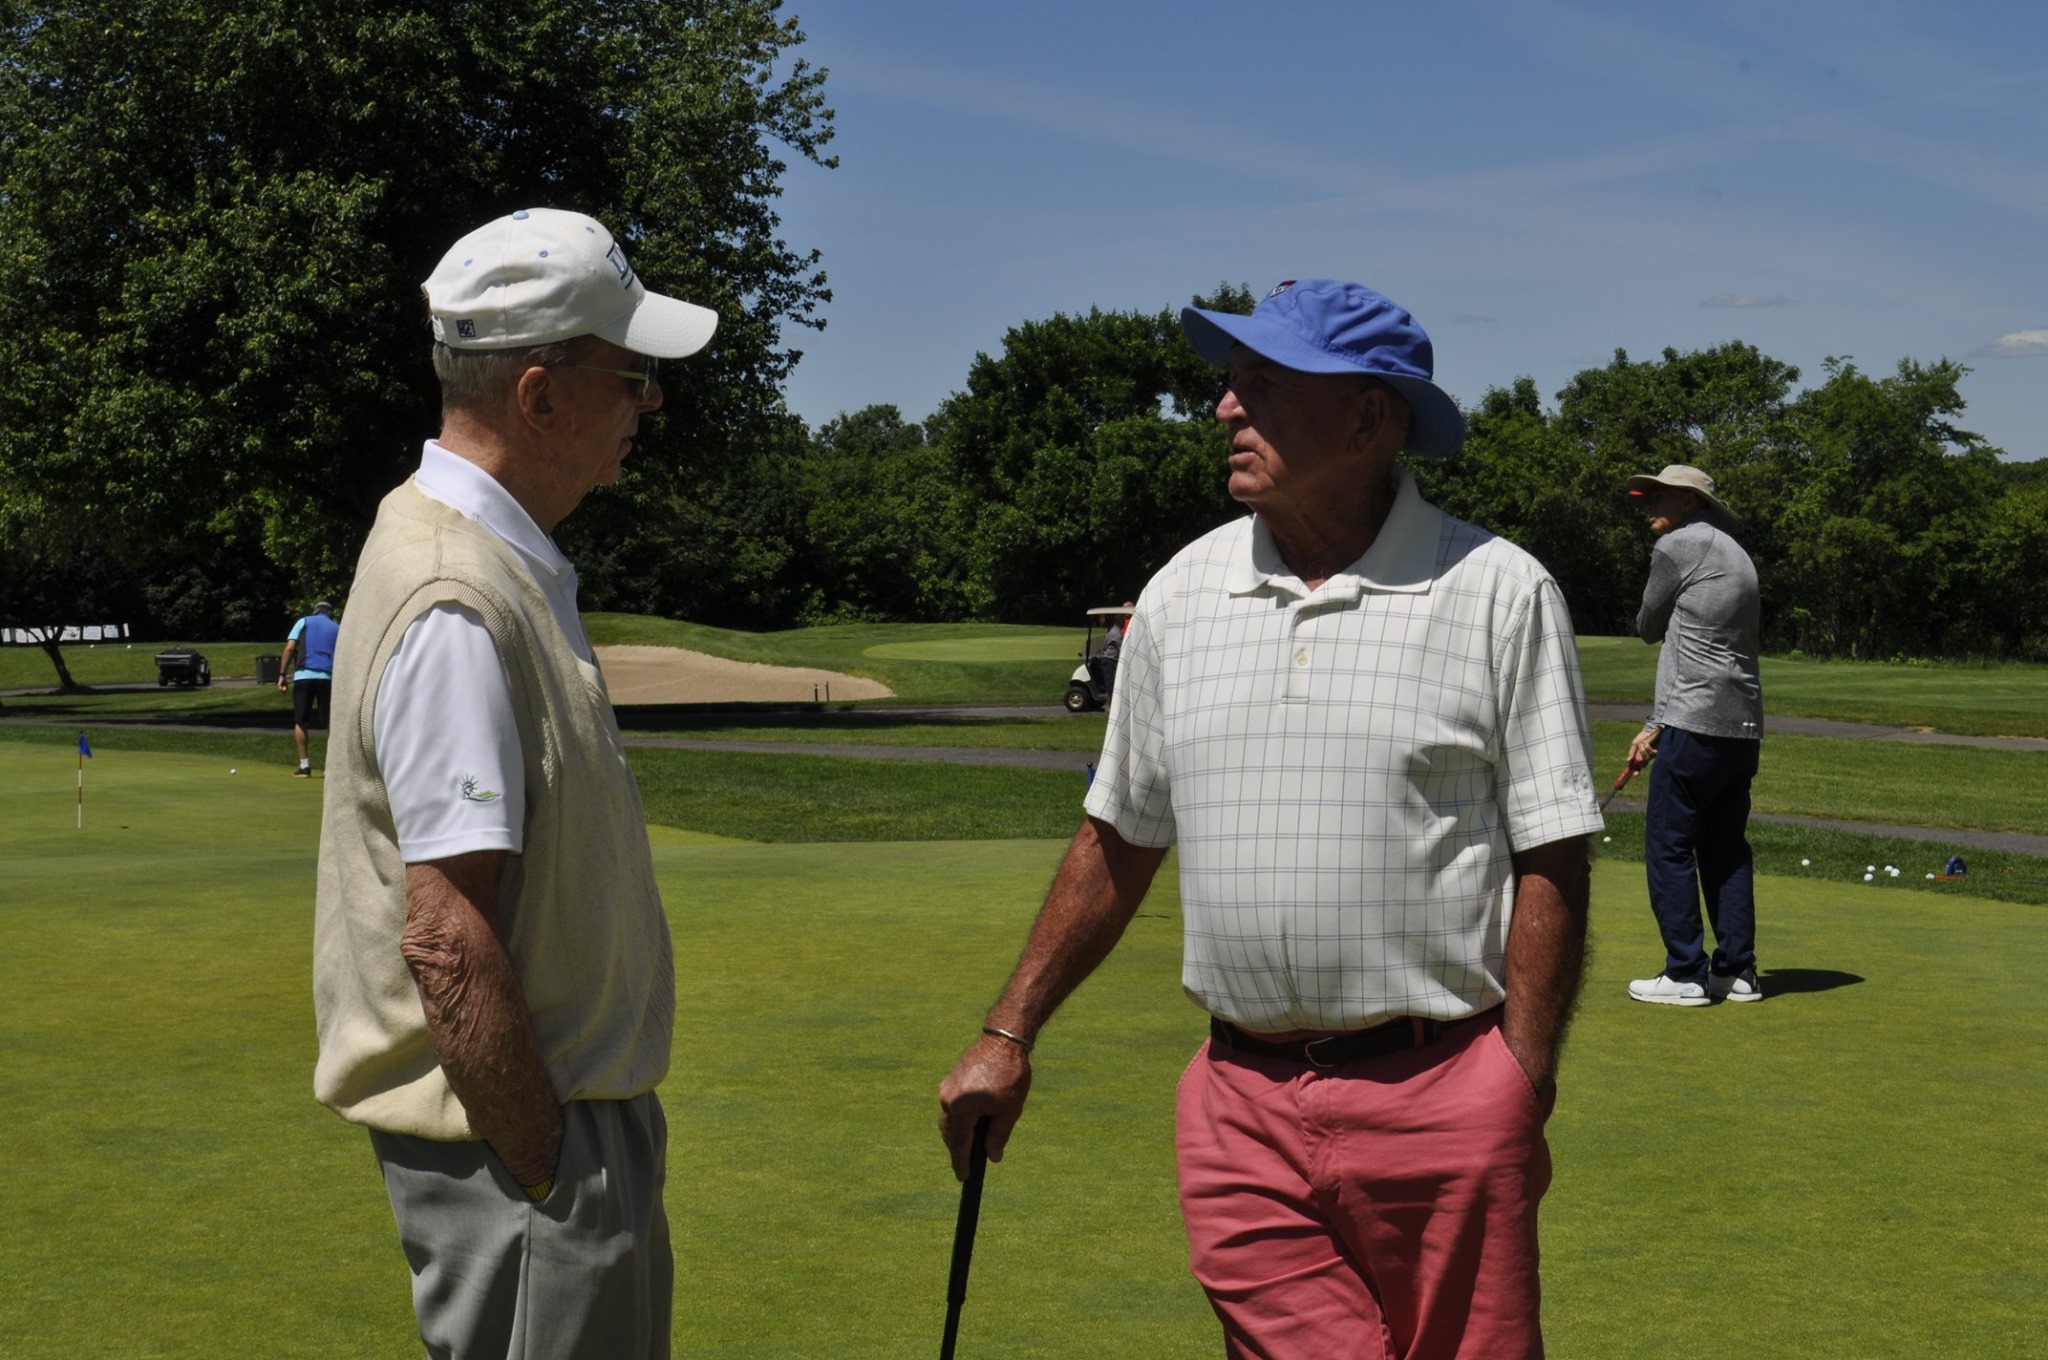 Staten Island Sports Hall of Fame golfers Ed Sorge (left), and Jim Albus (right)